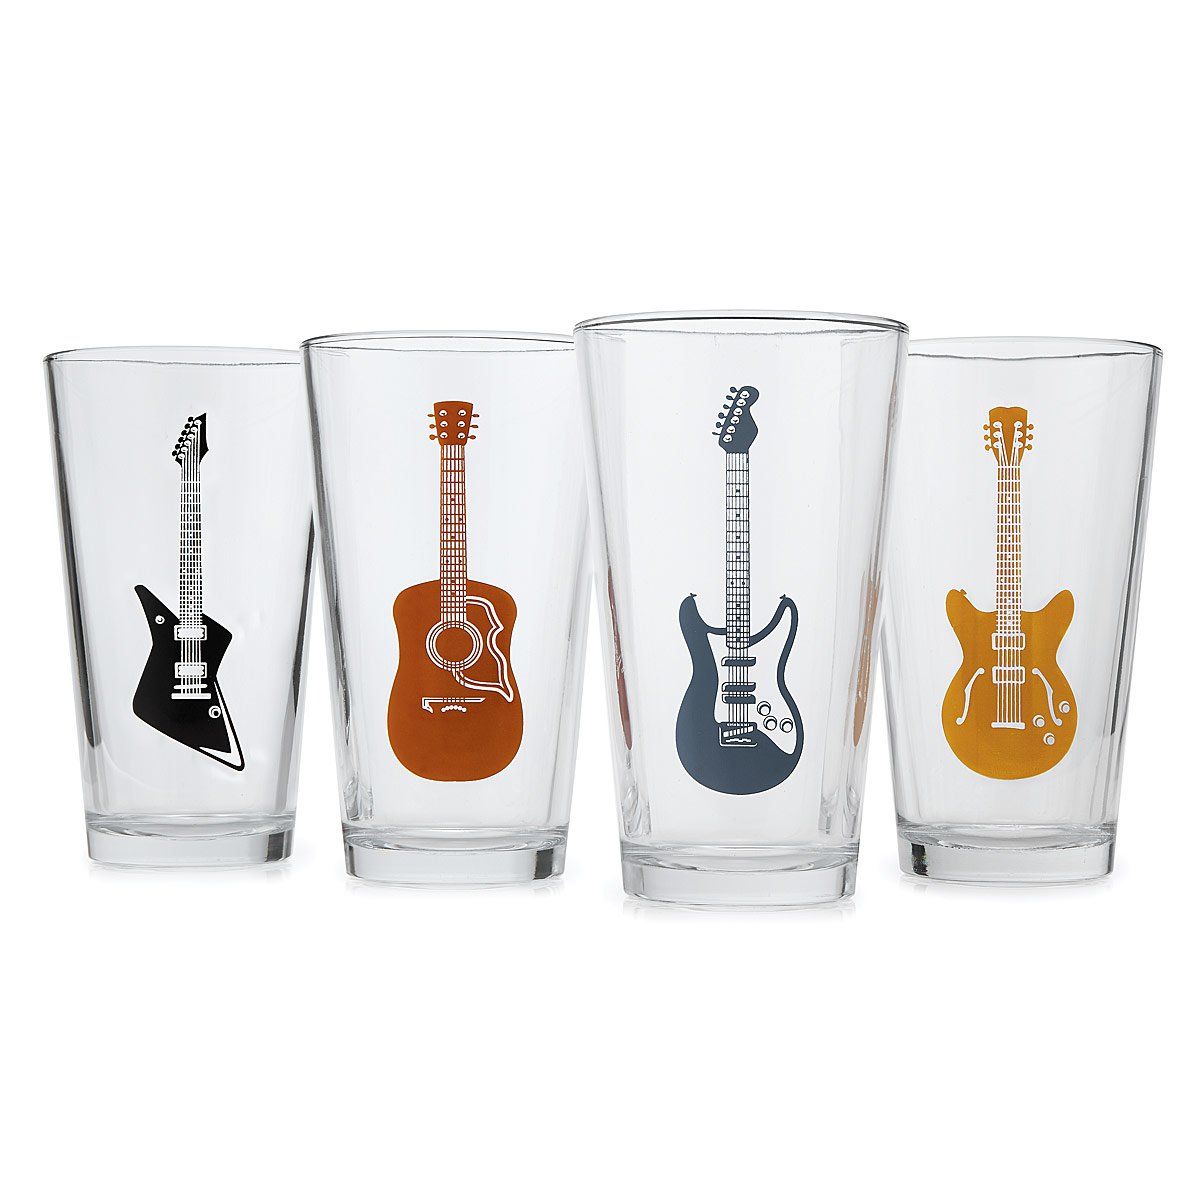 Guitar Glasses - Set of 4 | UncommonGoods